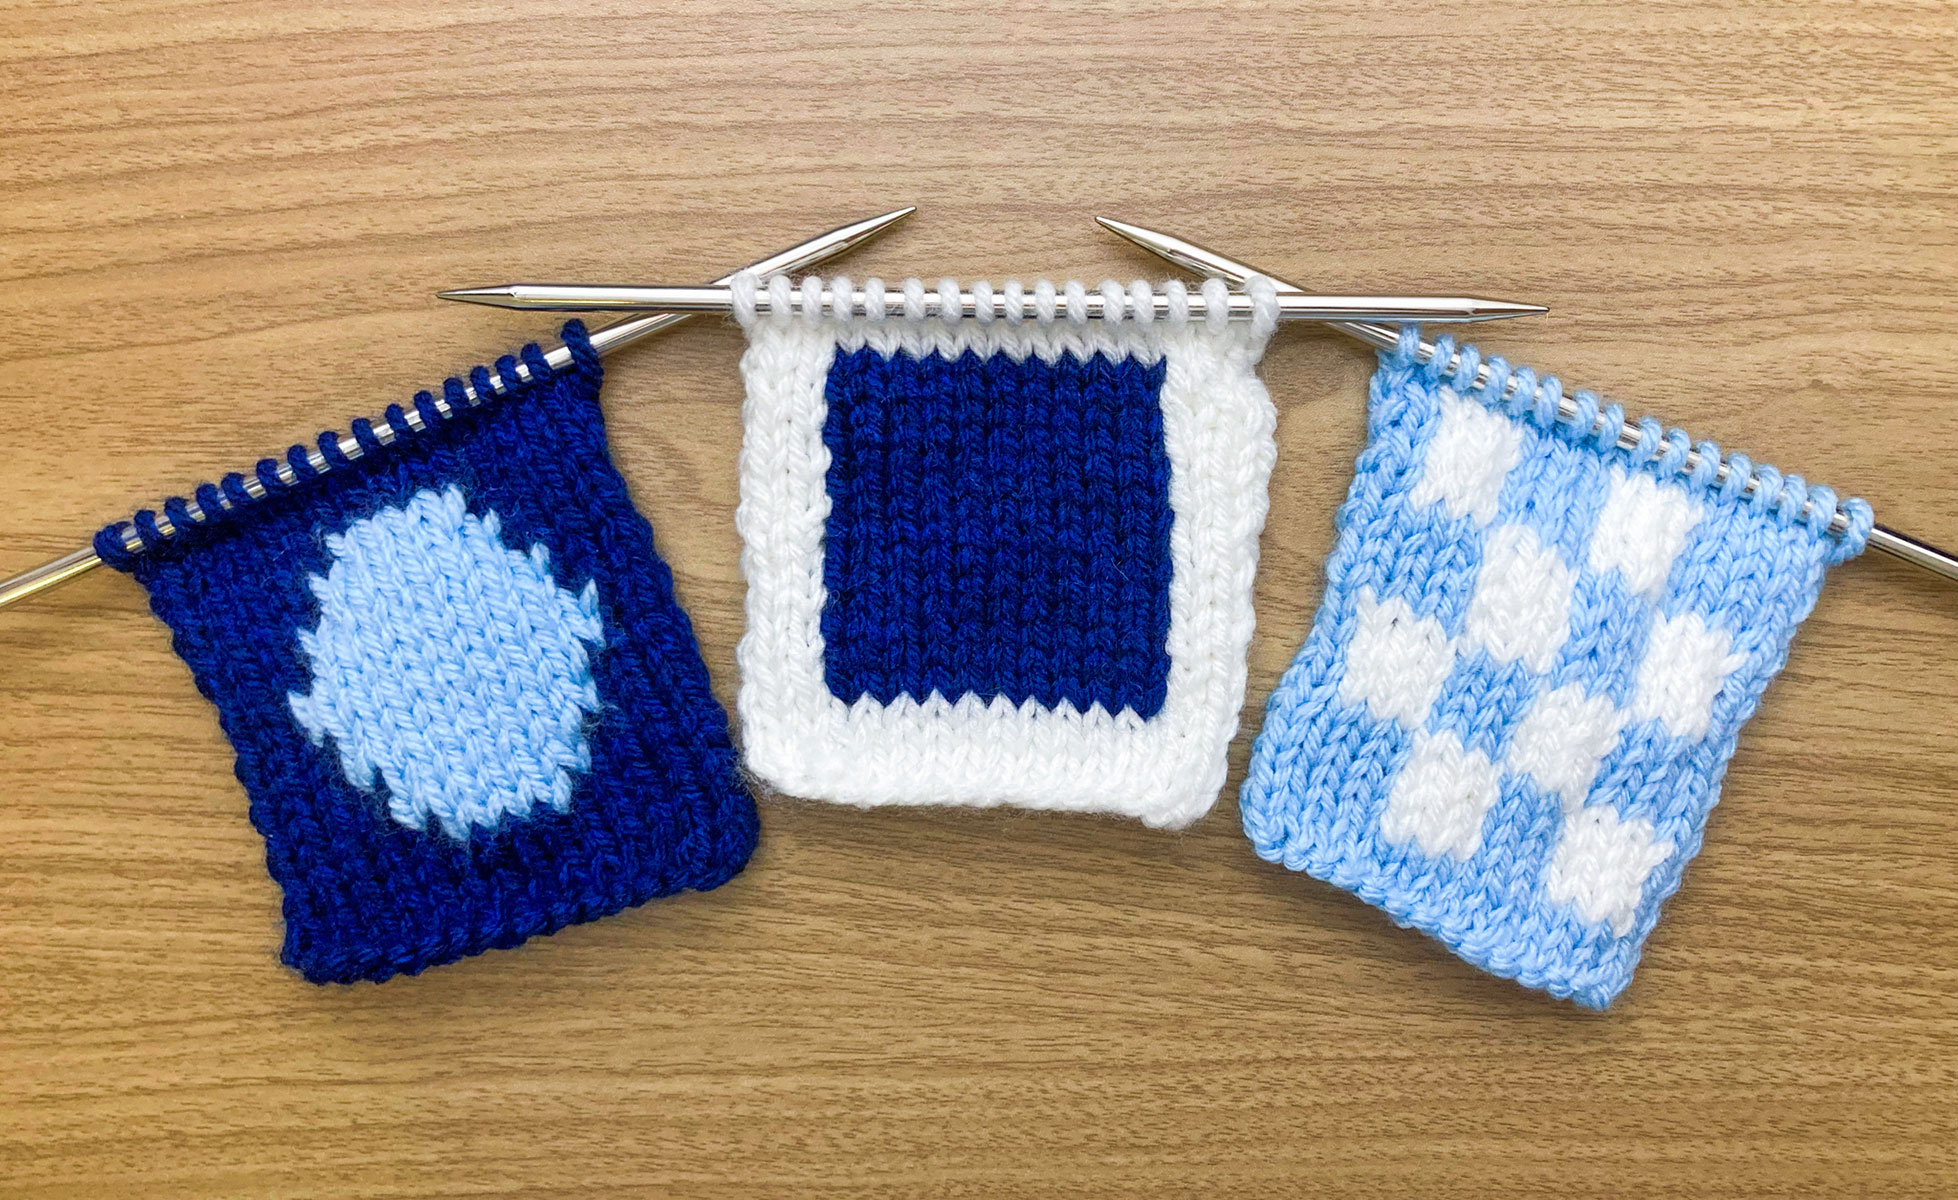 Three different intarsia patterns: a circle, a big square and little squares